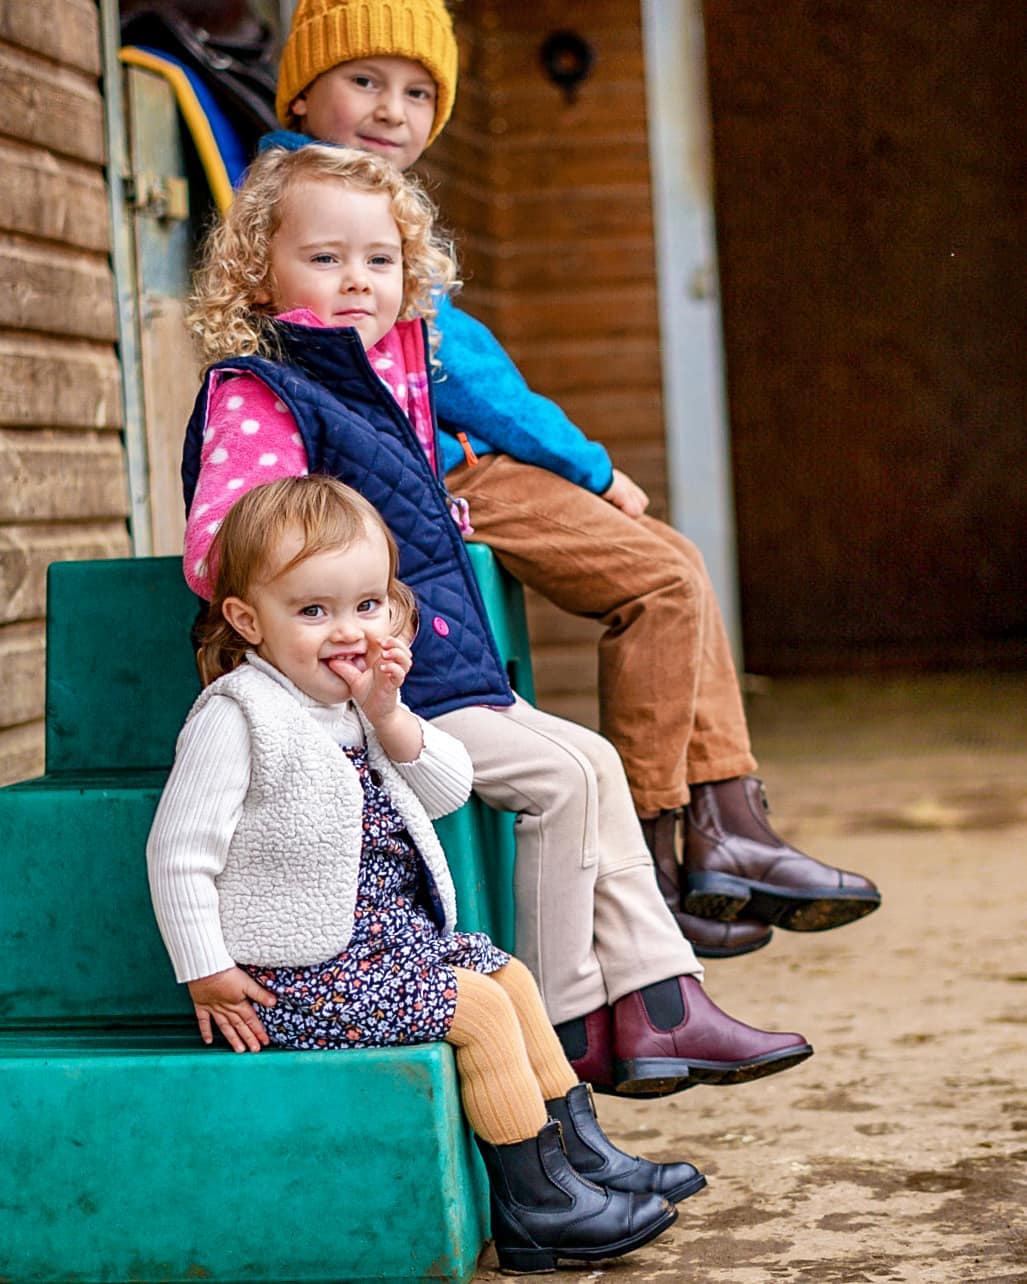 Toddler & Children's Traditional English Leather Horse Riding Boots